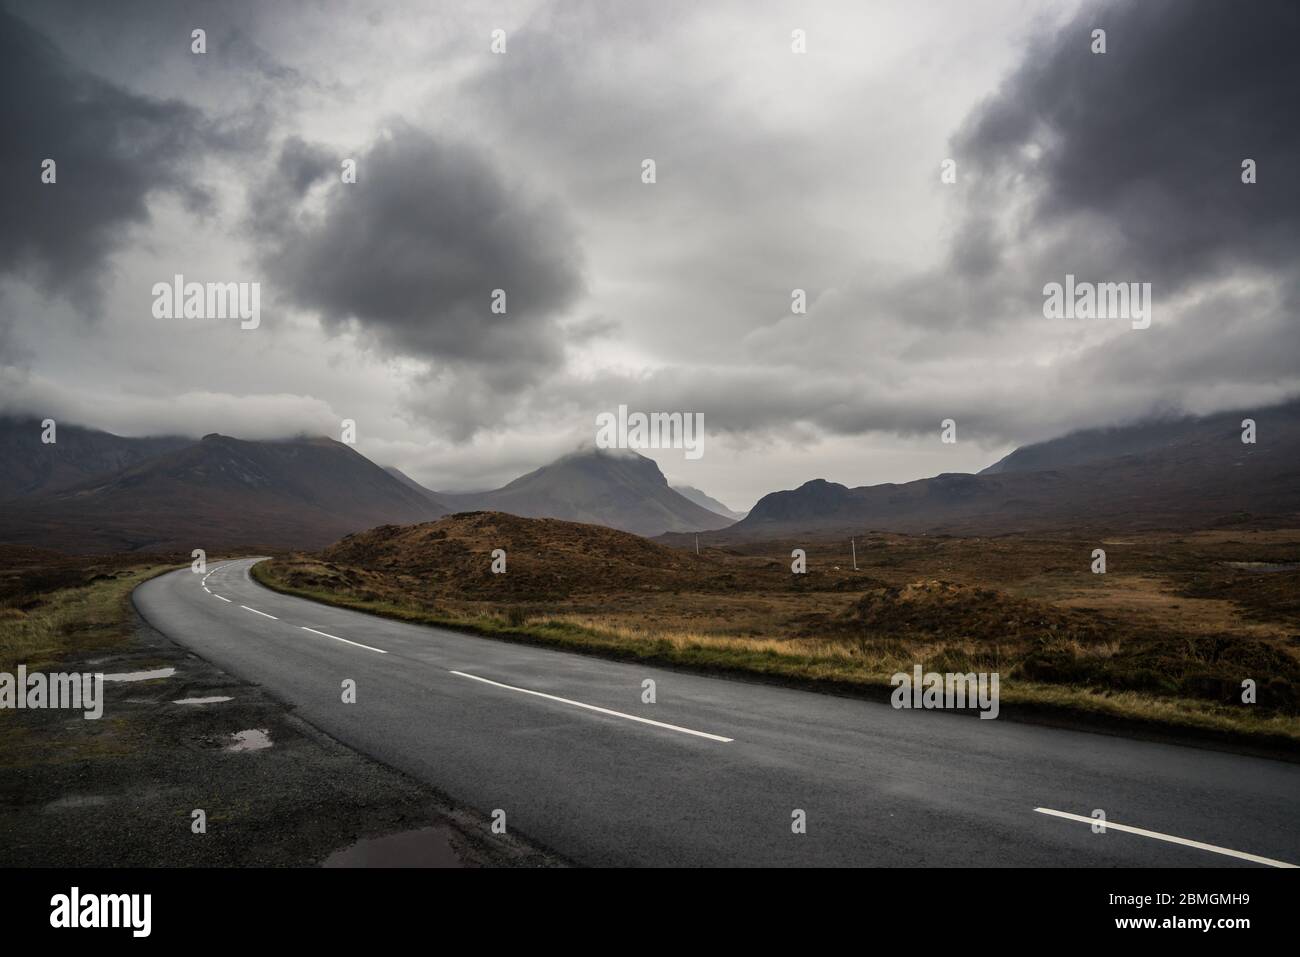 Just another damp road on a typical day on the Isle of Skye.  Damp, chilly, miserable, beautiful! Stock Photo